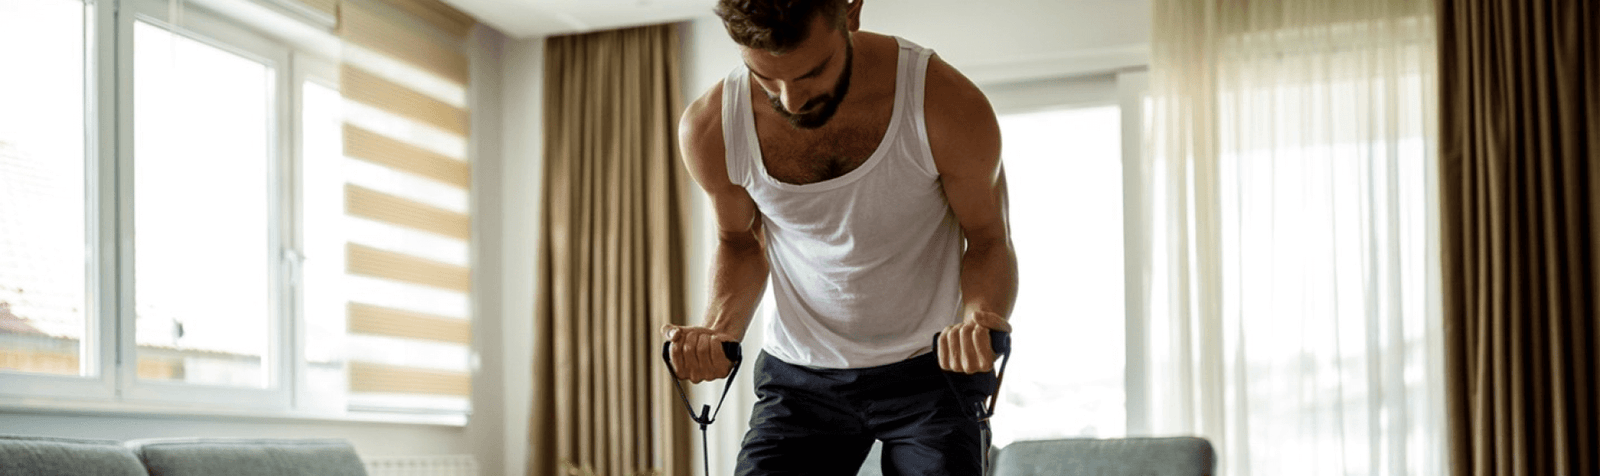 10 blockbuster tips to make your home gym a safer space to work out